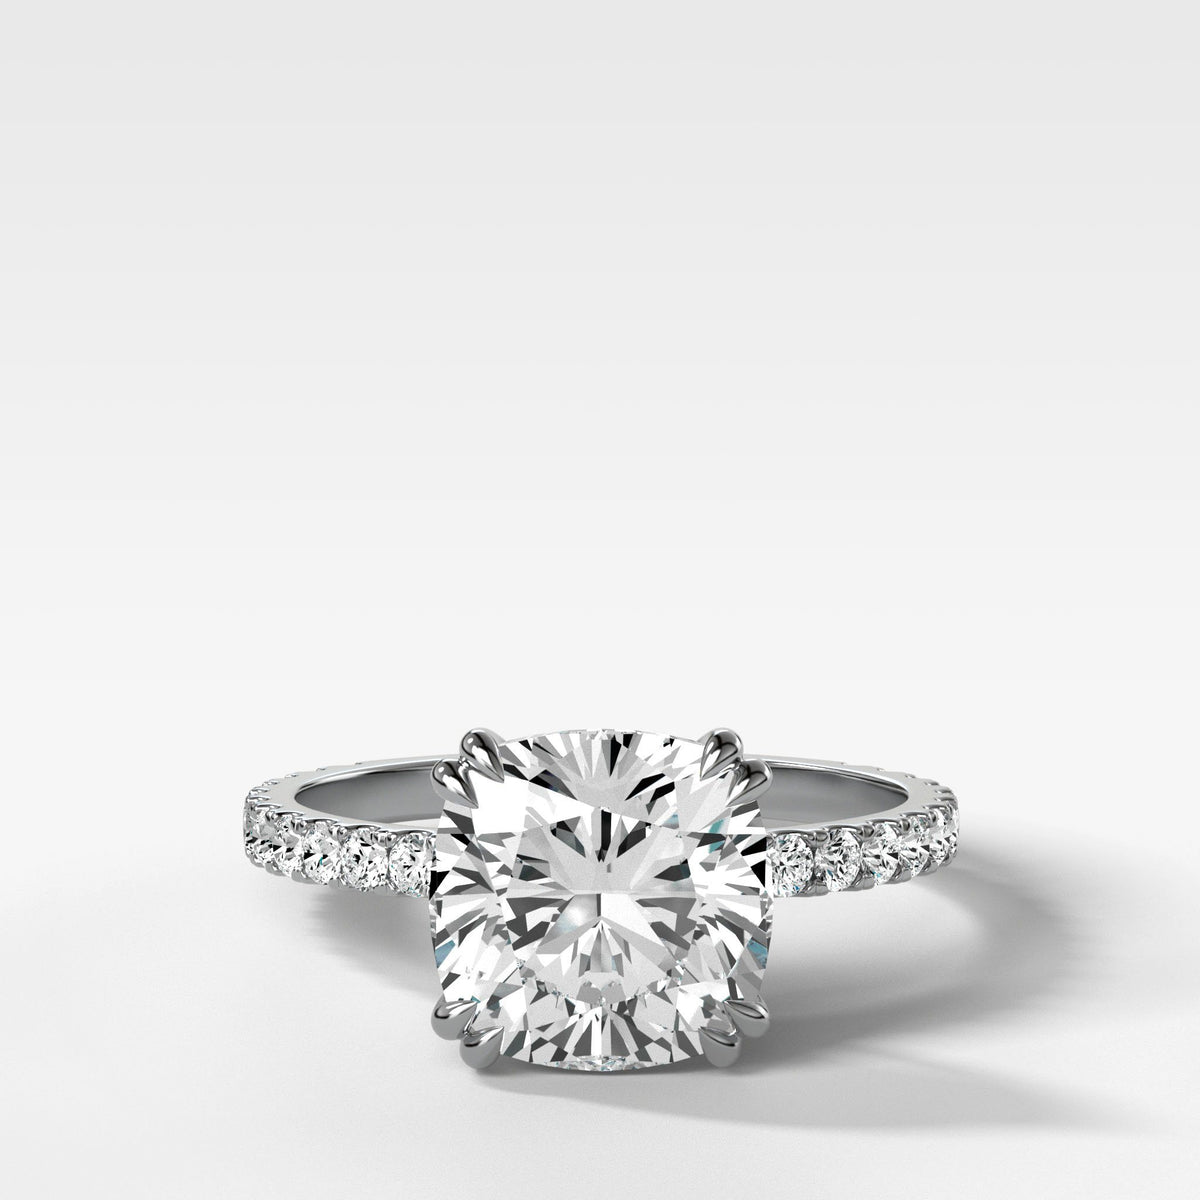 Signature Pave Engagement Ring With Cushion Cut by Good Stone in White Gold